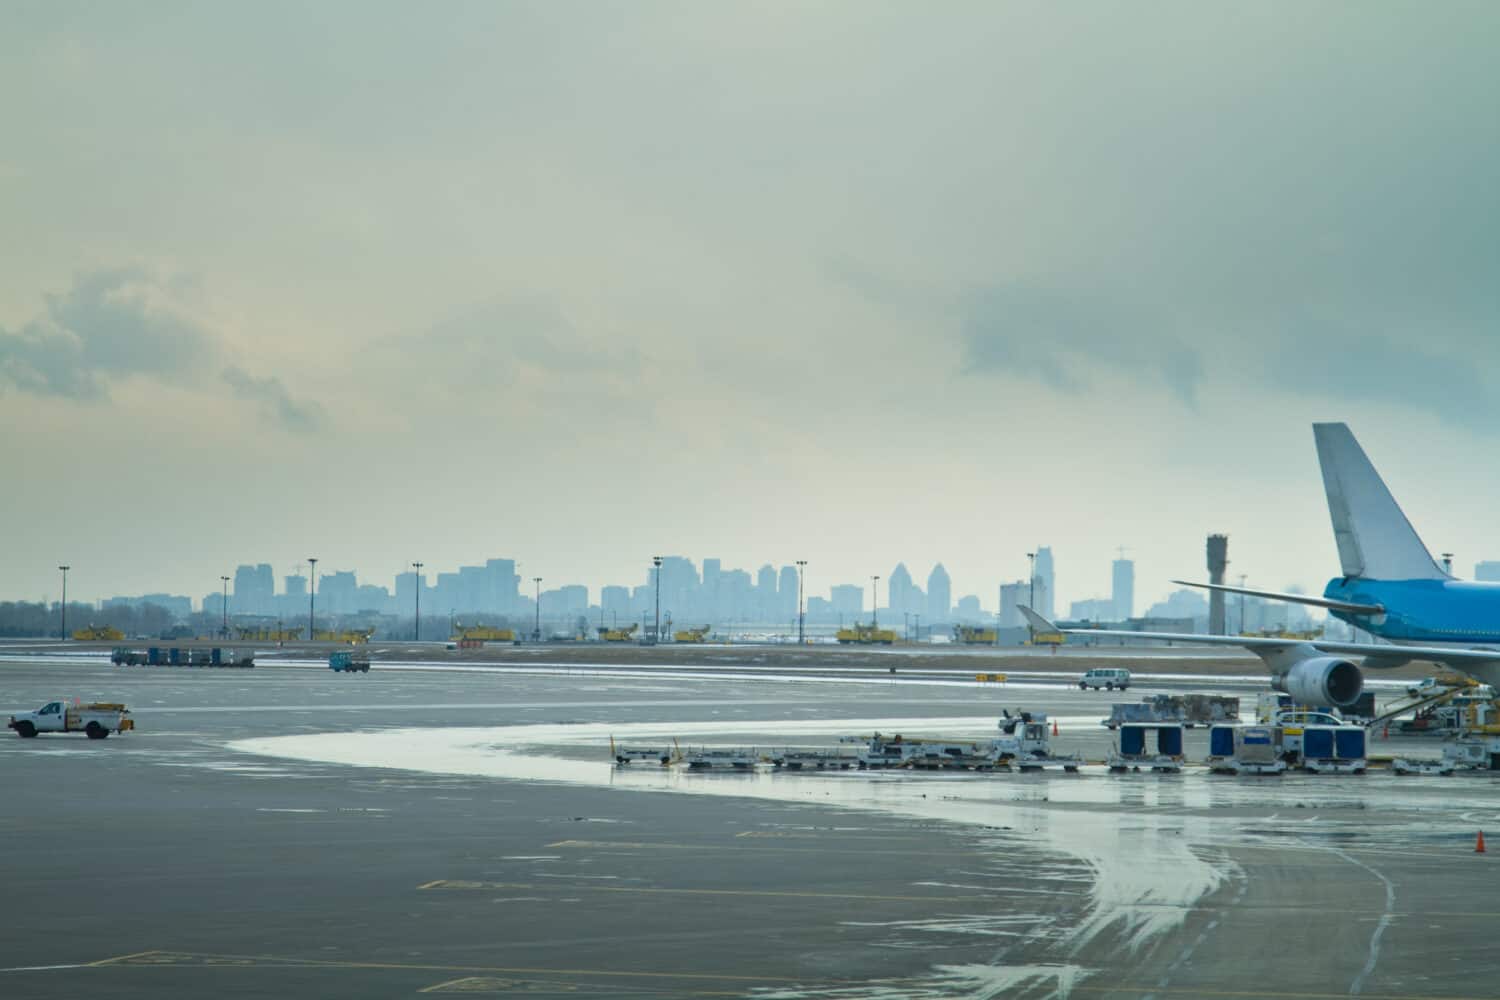 The tarmac at an airport, showing the rear of a passenger plane and service vehicles surrounding it, with a skyline of a city behind.  Pearson International airport, Toronto, Ontario.